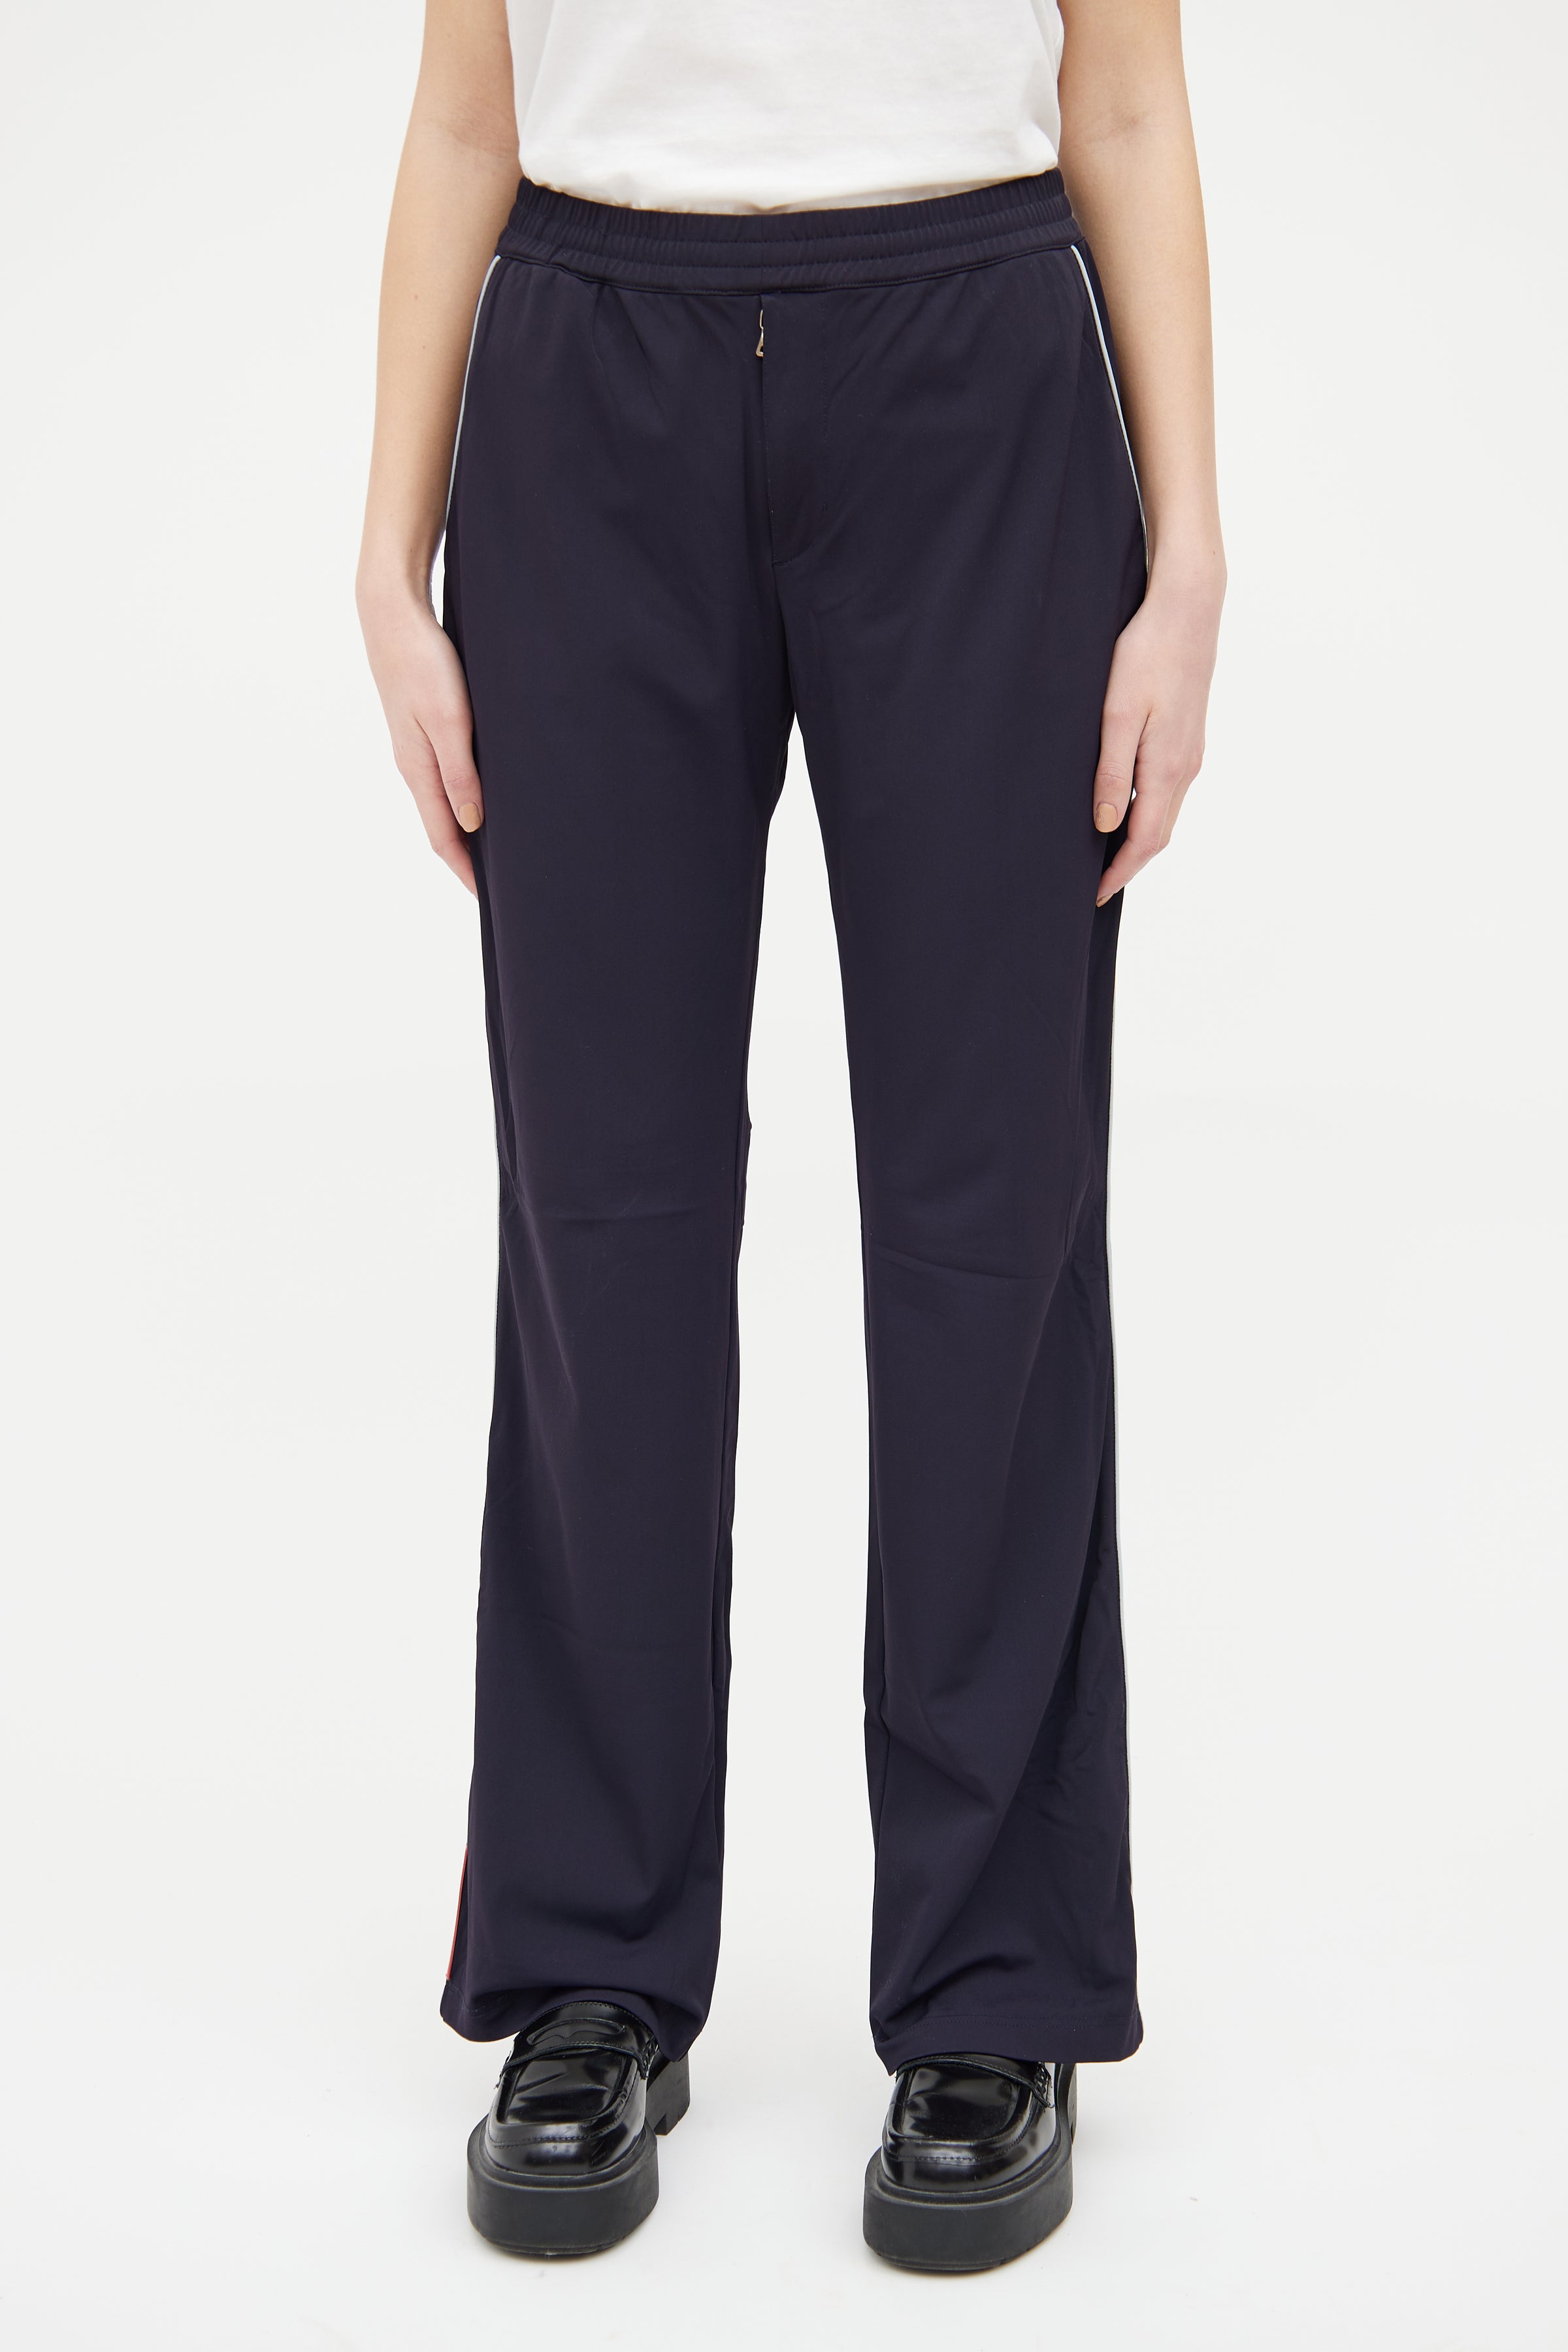 Hoys straight pants 7331 - Trousers